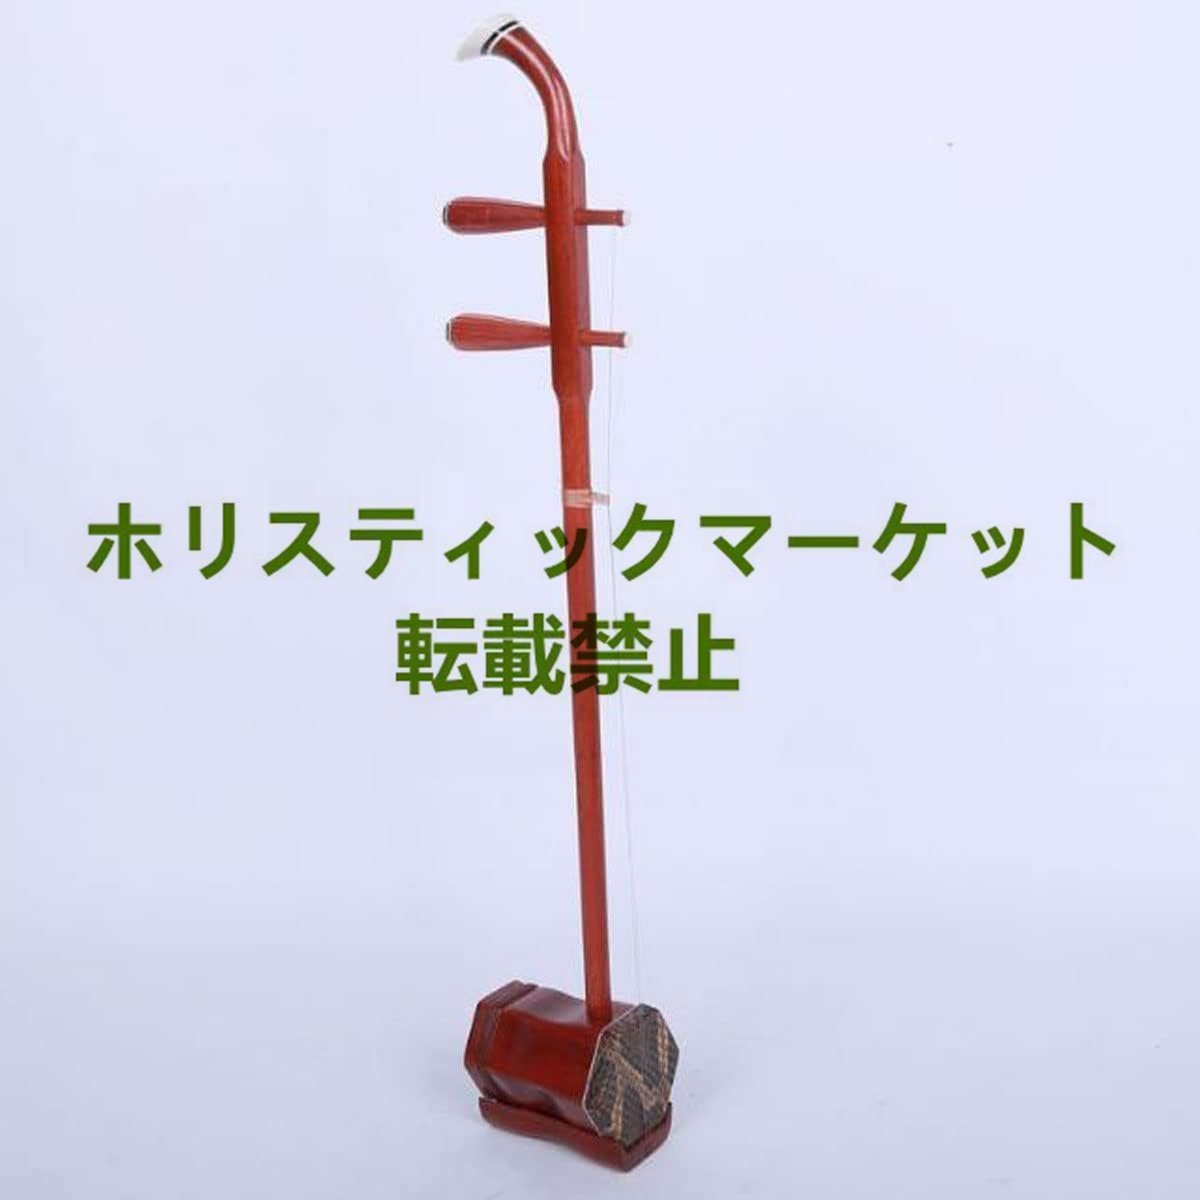  beautiful goods * high quality *.. two .. tree China musical instruments two . kokyu unused semi-hard case set 